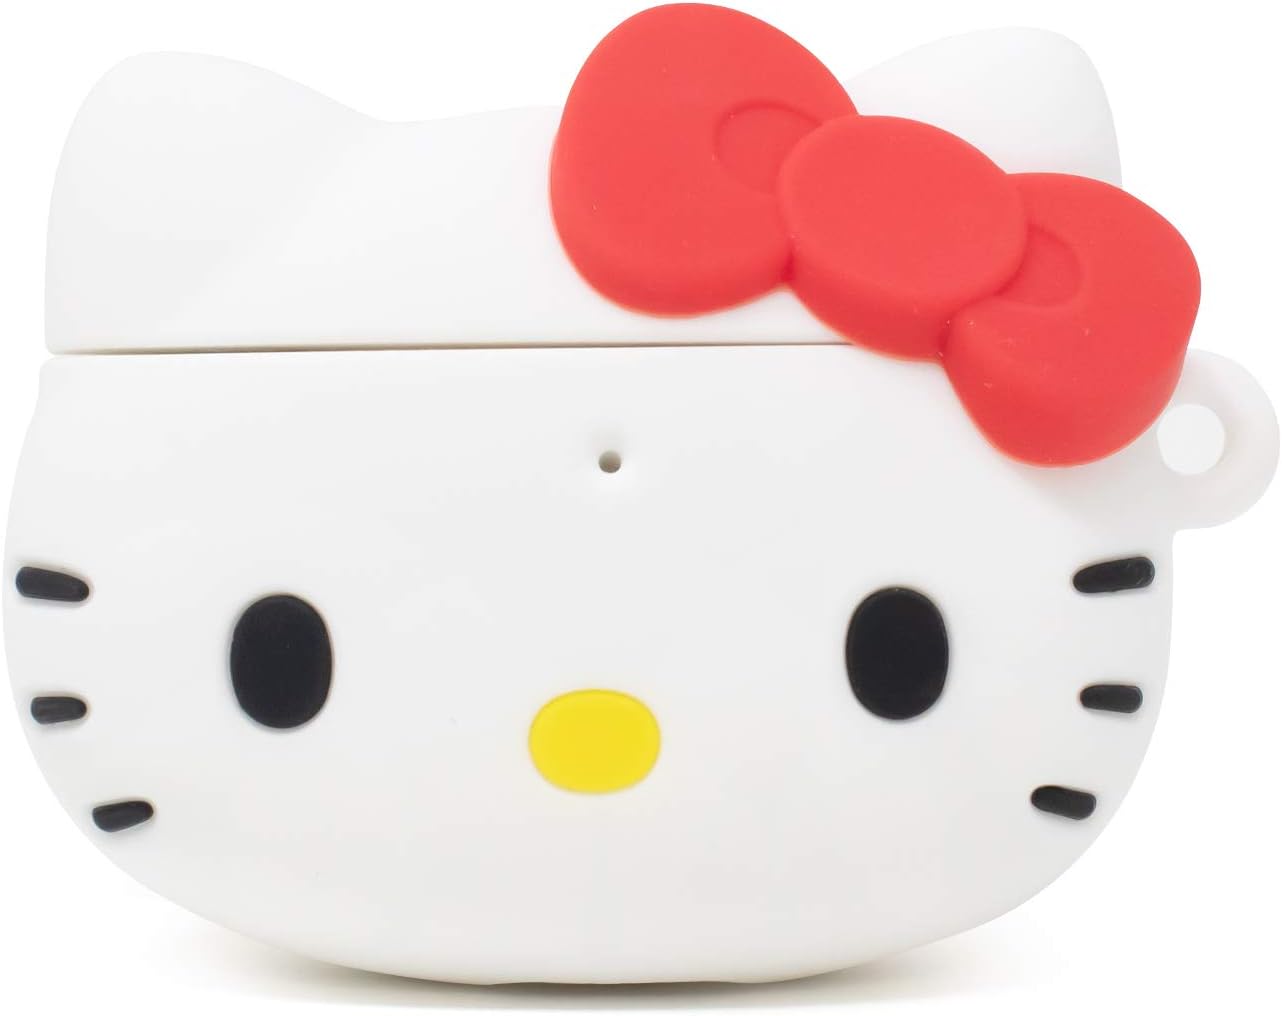 Buy iFace x Sanrio Cute Silicone Protective Cover Designed for AirPods 12  Case [Carabiner Clip Included] [Wireless Charging Compatible] - Hello Kitty  Online in Pakistan. B08HH5SWKB